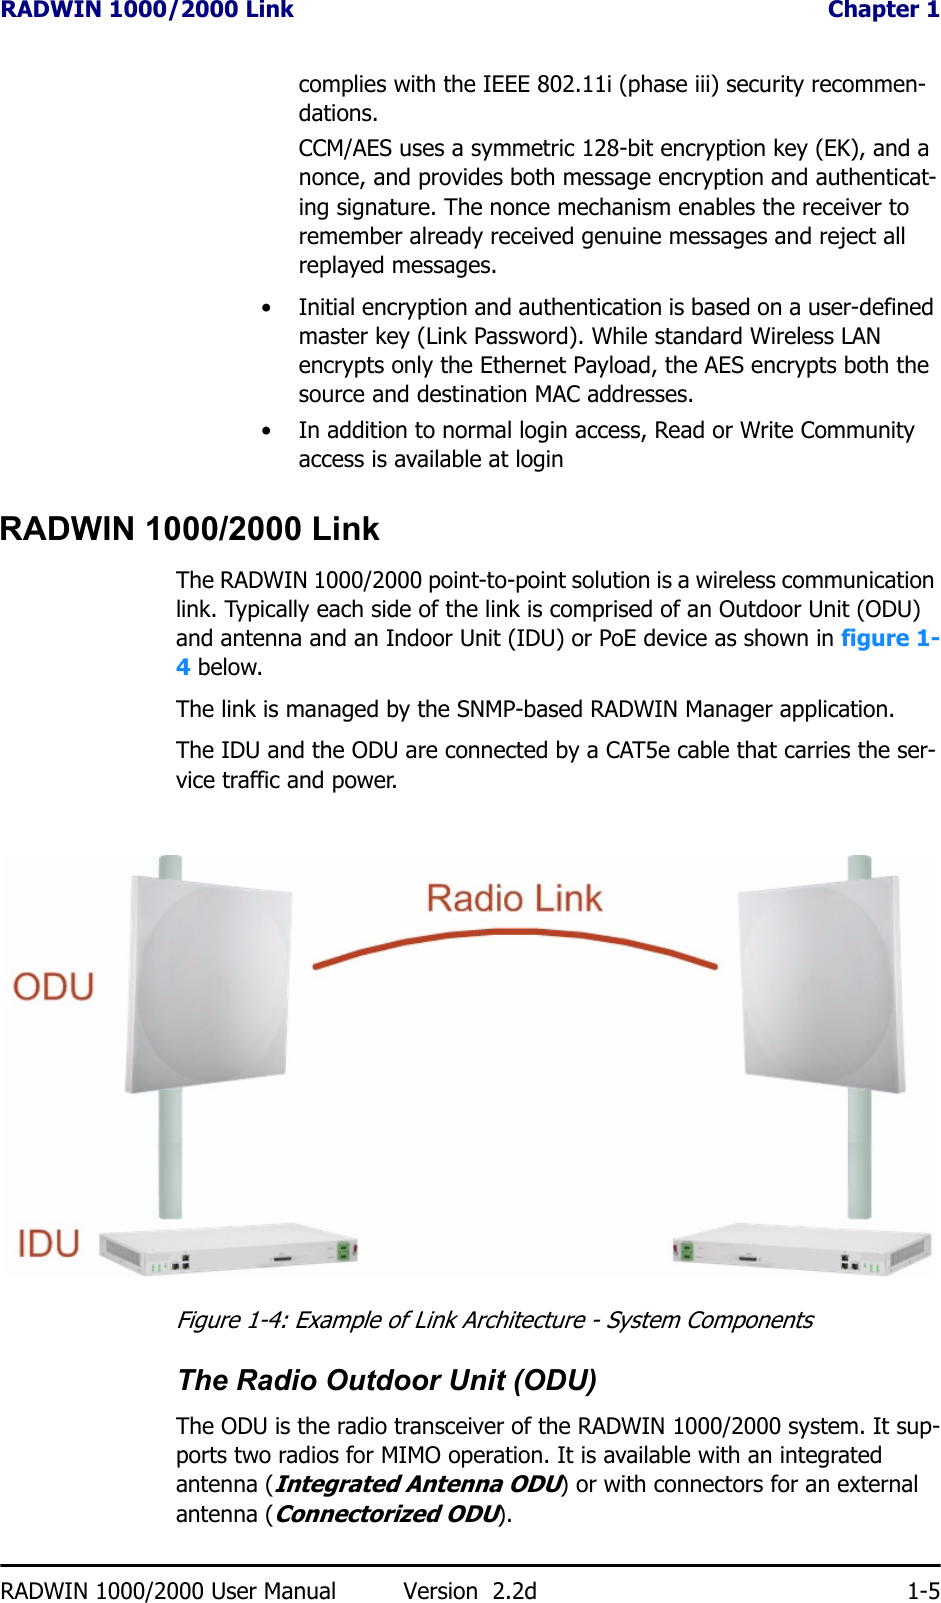 RADWIN 1000/2000 Link  Chapter 1RADWIN 1000/2000 User Manual Version  2.2d 1-5complies with the IEEE 802.11i (phase iii) security recommen-dations.CCM/AES uses a symmetric 128-bit encryption key (EK), and a nonce, and provides both message encryption and authenticat-ing signature. The nonce mechanism enables the receiver to remember already received genuine messages and reject all replayed messages.• Initial encryption and authentication is based on a user-defined master key (Link Password). While standard Wireless LAN encrypts only the Ethernet Payload, the AES encrypts both the source and destination MAC addresses.• In addition to normal login access, Read or Write Community access is available at loginRADWIN 1000/2000 LinkThe RADWIN 1000/2000 point-to-point solution is a wireless communication link. Typically each side of the link is comprised of an Outdoor Unit (ODU) and antenna and an Indoor Unit (IDU) or PoE device as shown in figure 1-4 below.The link is managed by the SNMP-based RADWIN Manager application.The IDU and the ODU are connected by a CAT5e cable that carries the ser-vice traffic and power. Figure 1-4: Example of Link Architecture - System ComponentsThe Radio Outdoor Unit (ODU)The ODU is the radio transceiver of the RADWIN 1000/2000 system. It sup-ports two radios for MIMO operation. It is available with an integrated antenna (Integrated Antenna ODU) or with connectors for an external antenna (Connectorized ODU).